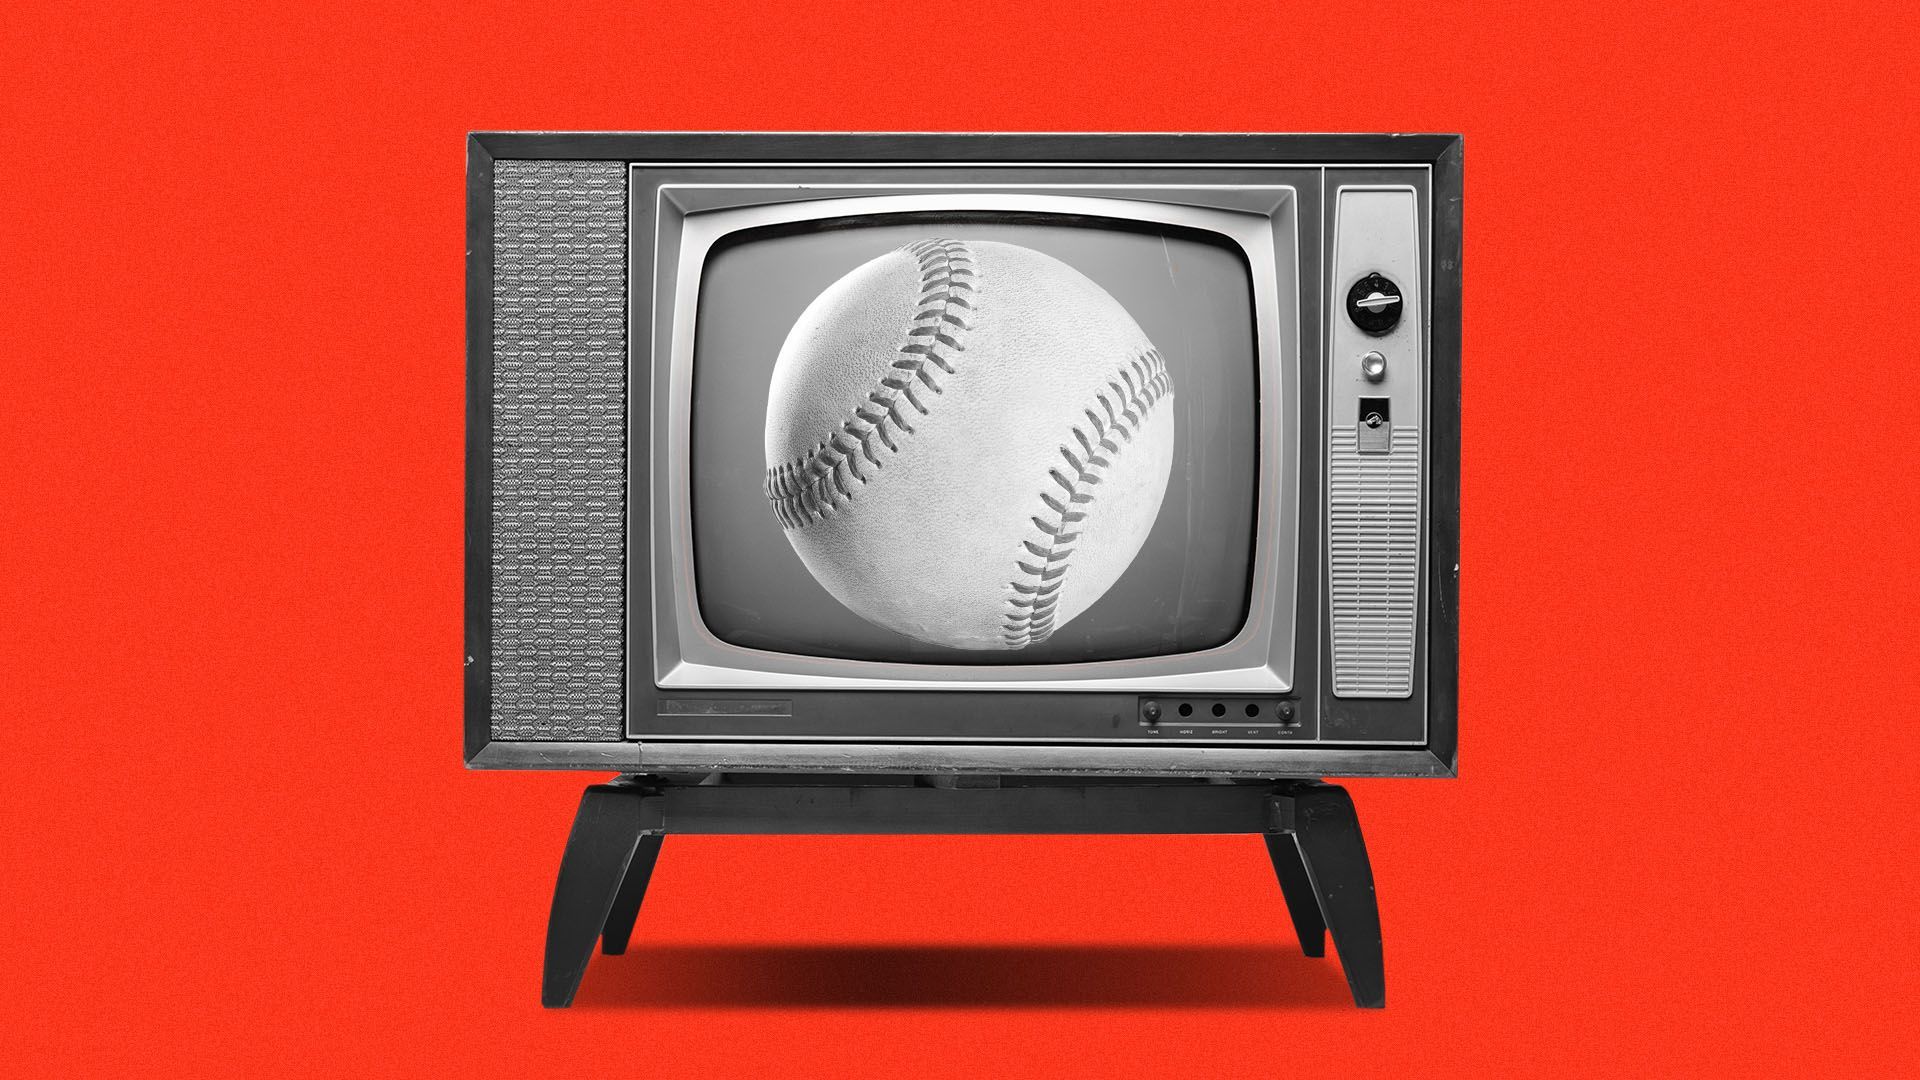 Illustration of a vintage television with a baseball on it